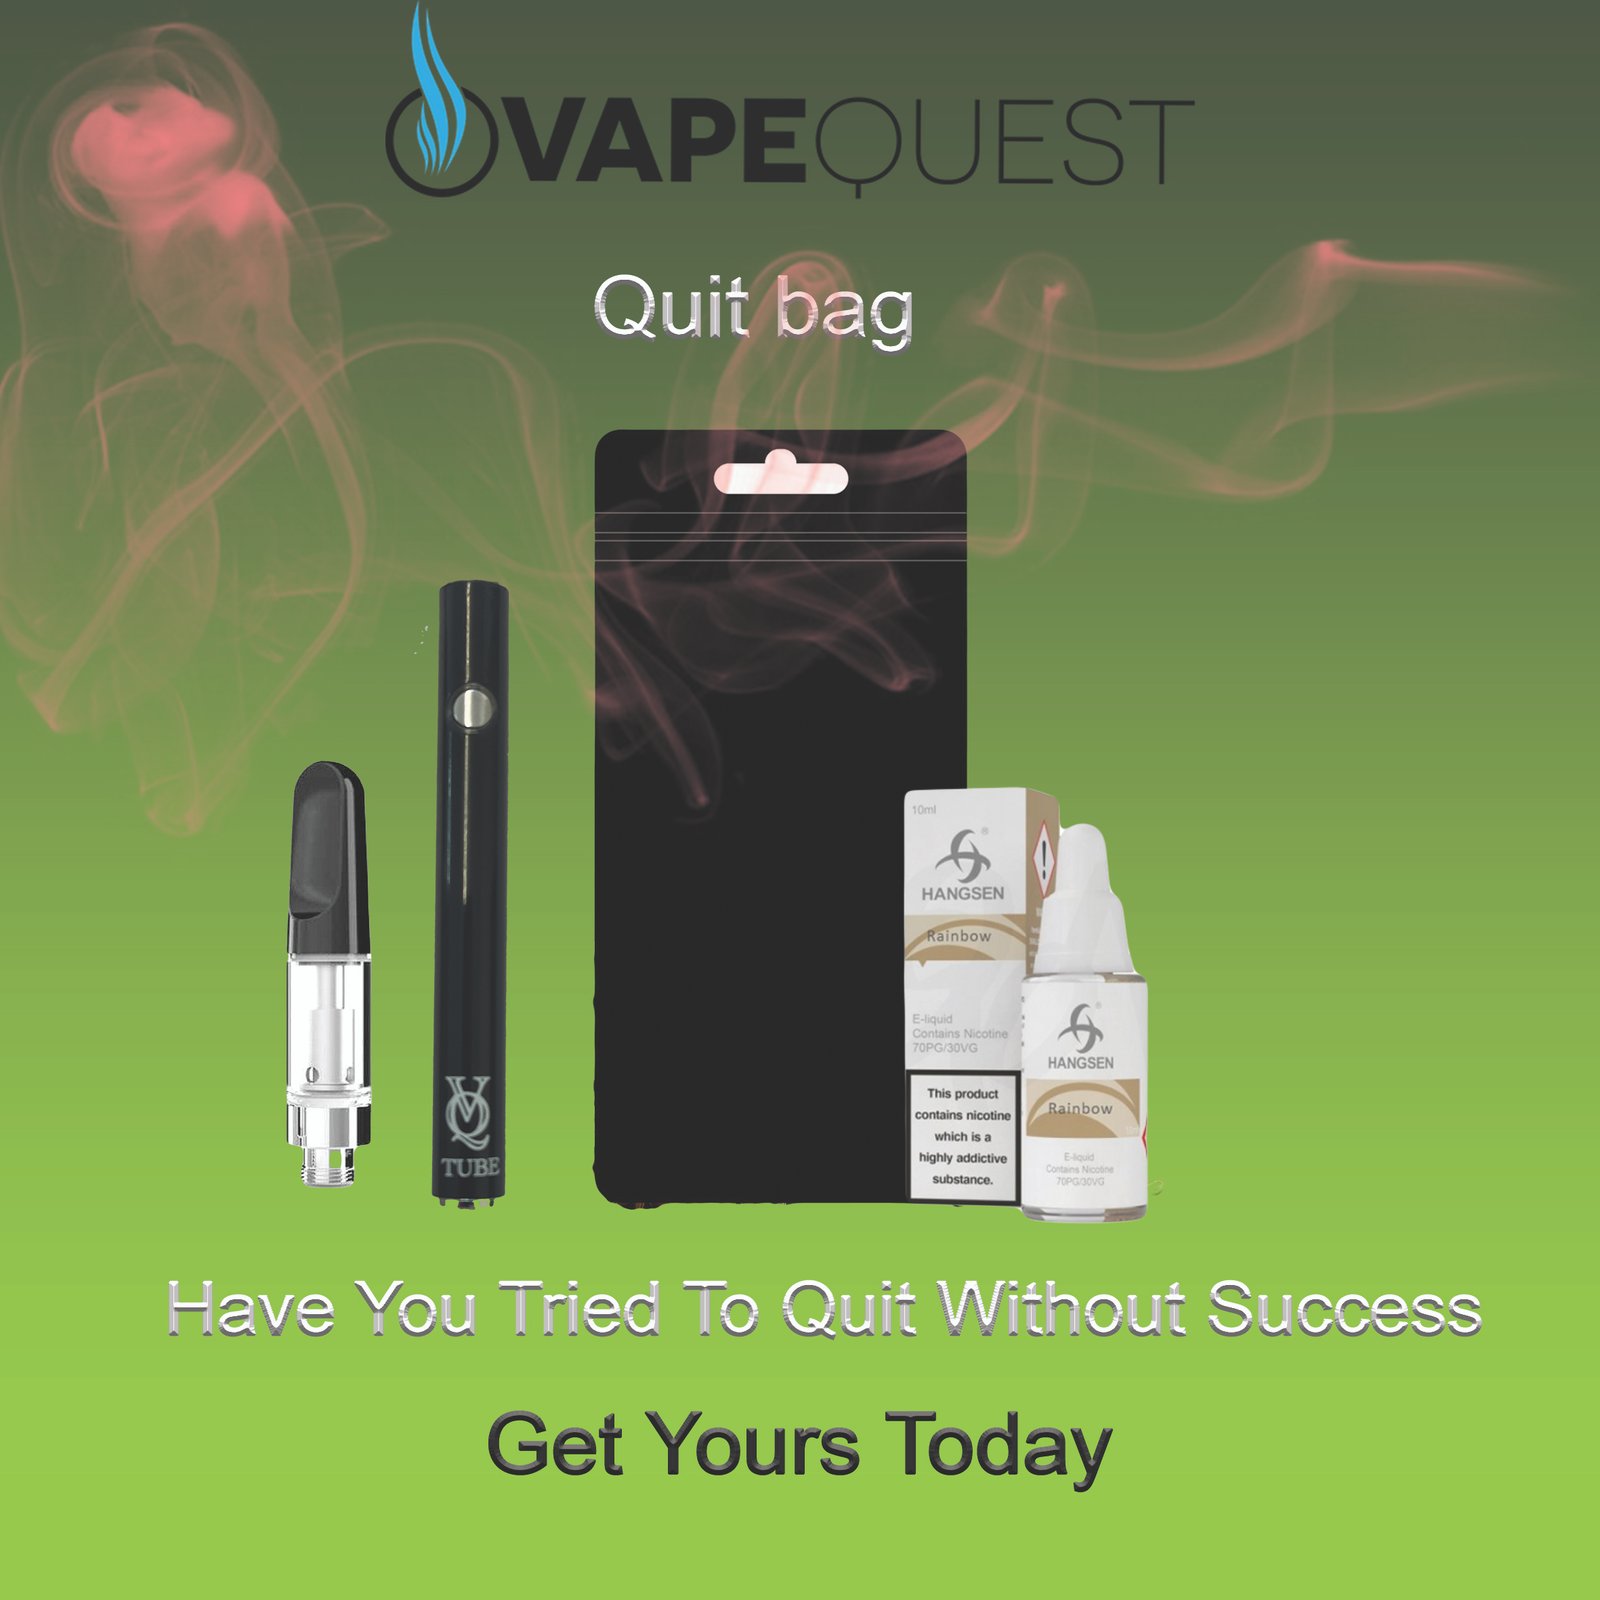 This is an image of VapeQuests Quit Bag